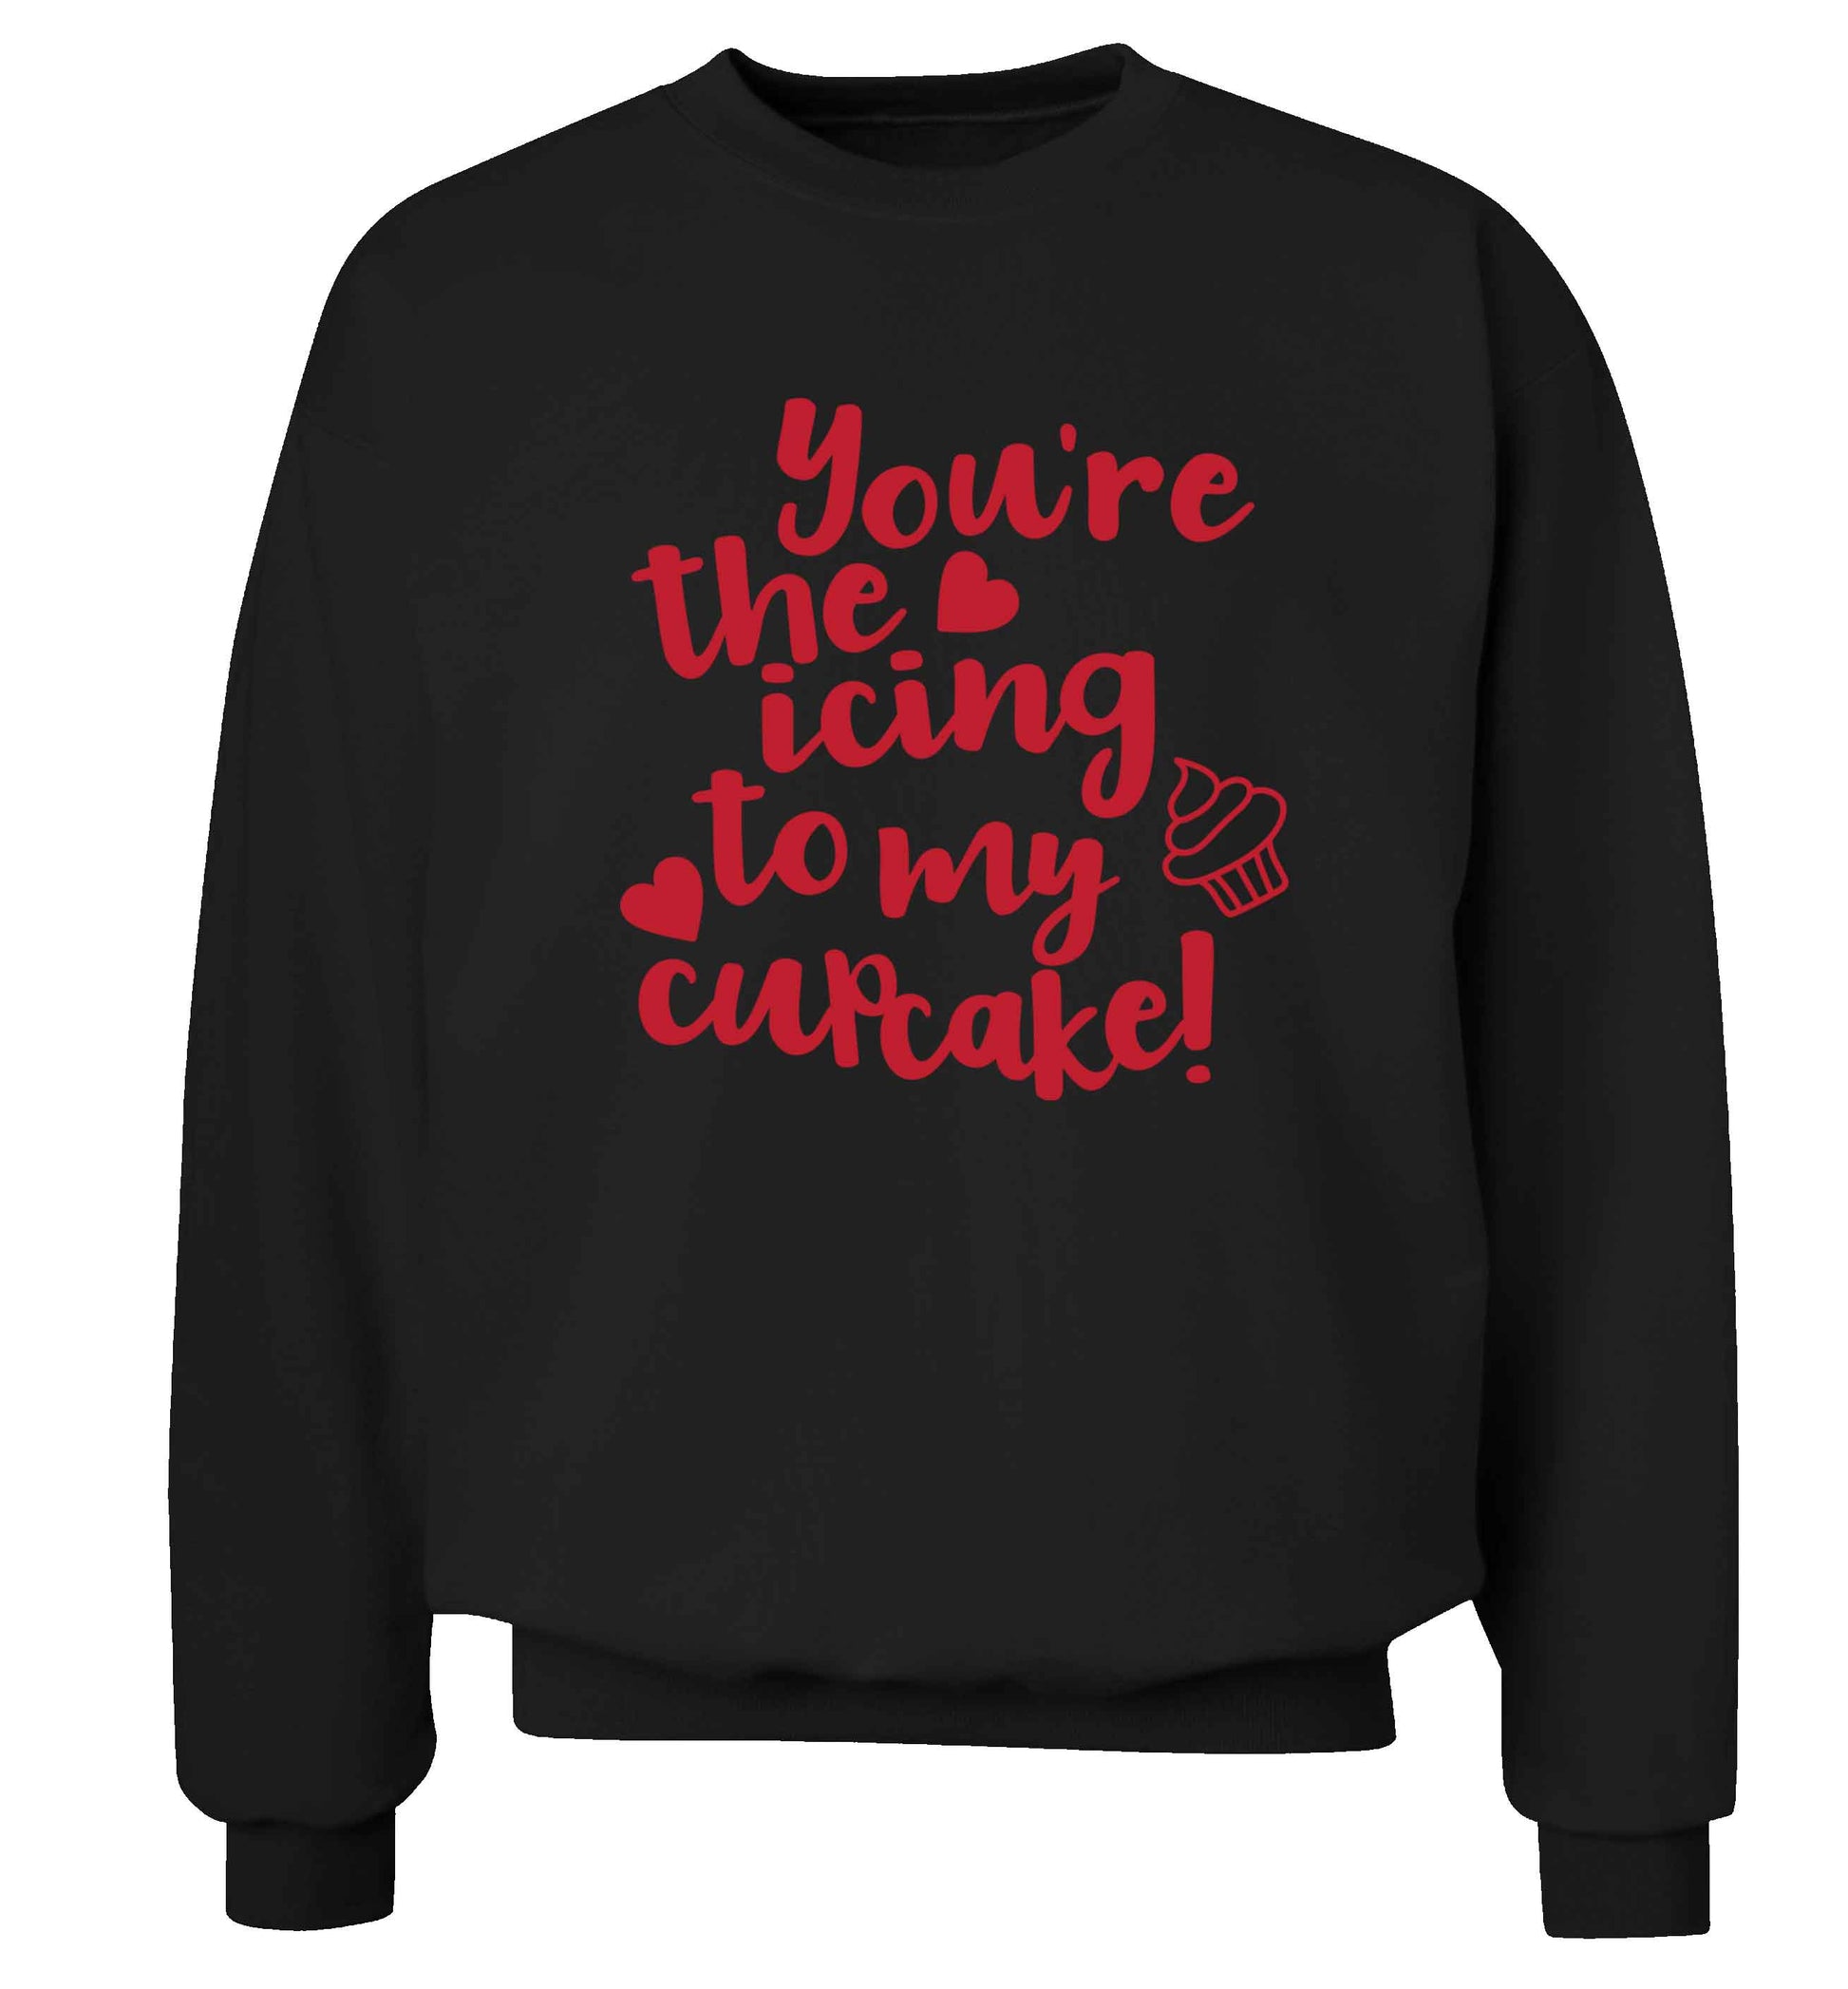 You're the icing to my cupcake Adult's unisex black Sweater 2XL